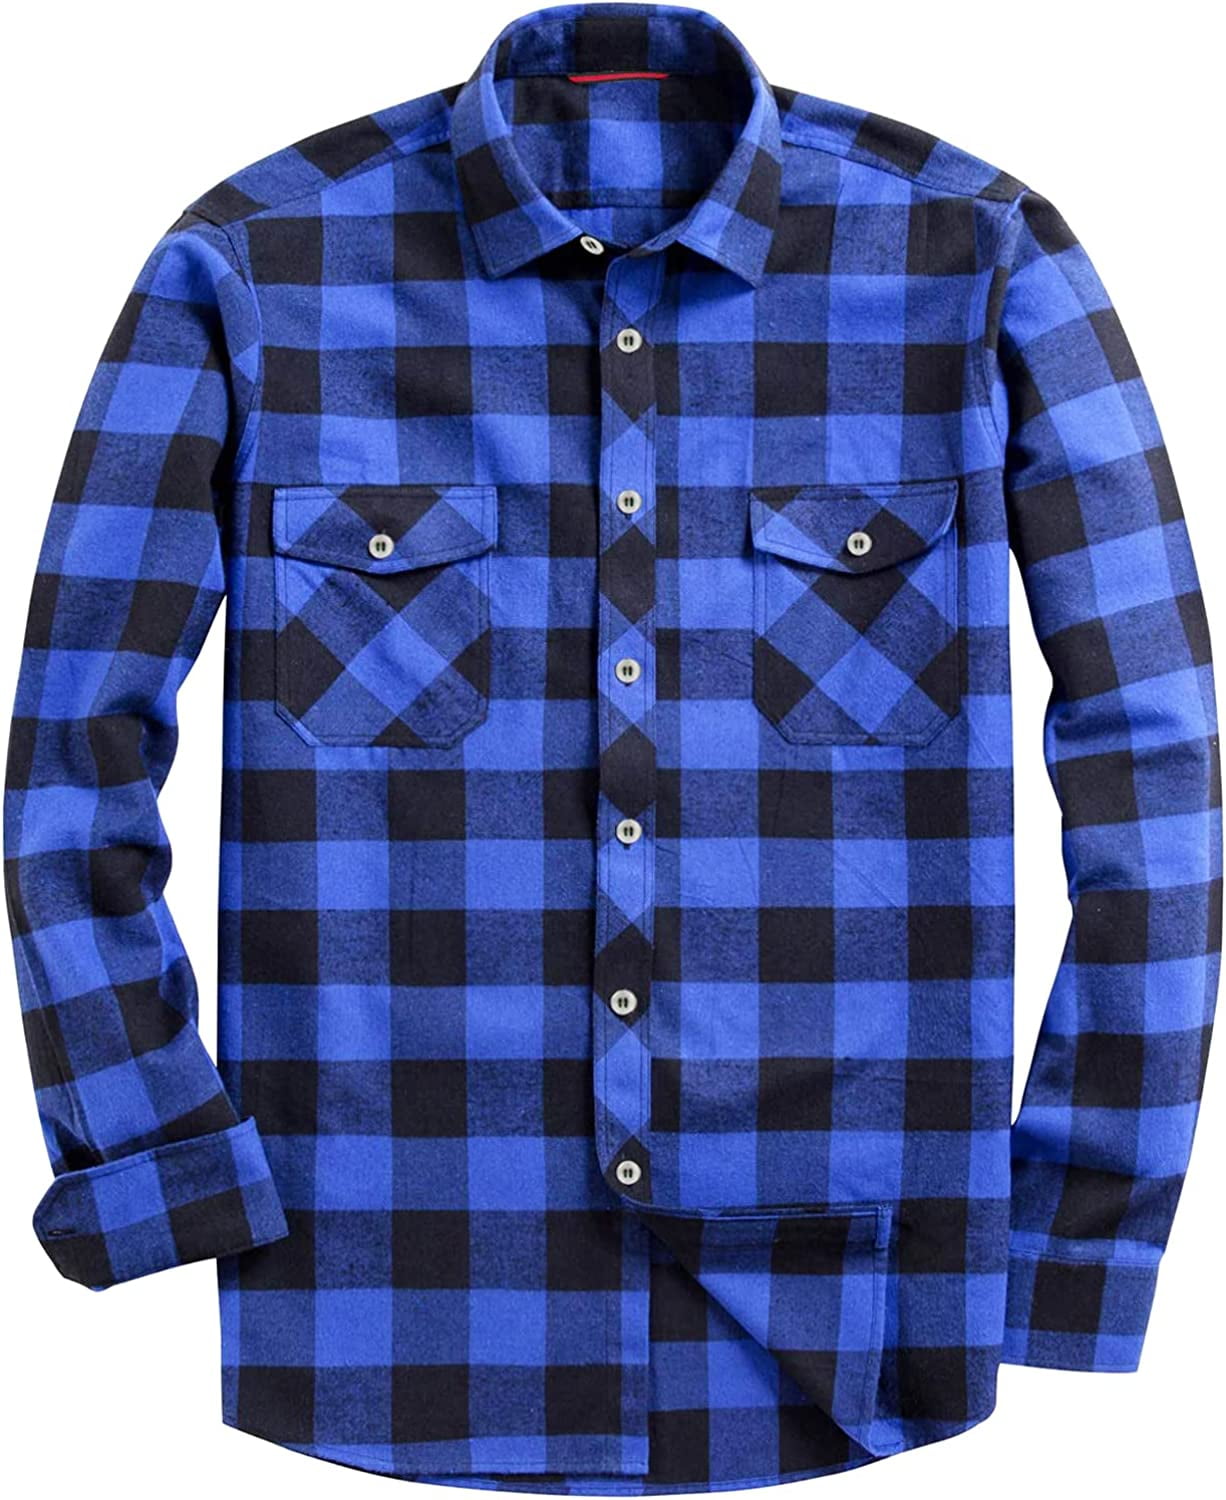 LANBAOSI Flannel Shirt for Men Long Sleeve Casual Button Down Work Plaid  Shirts with Pockets XL